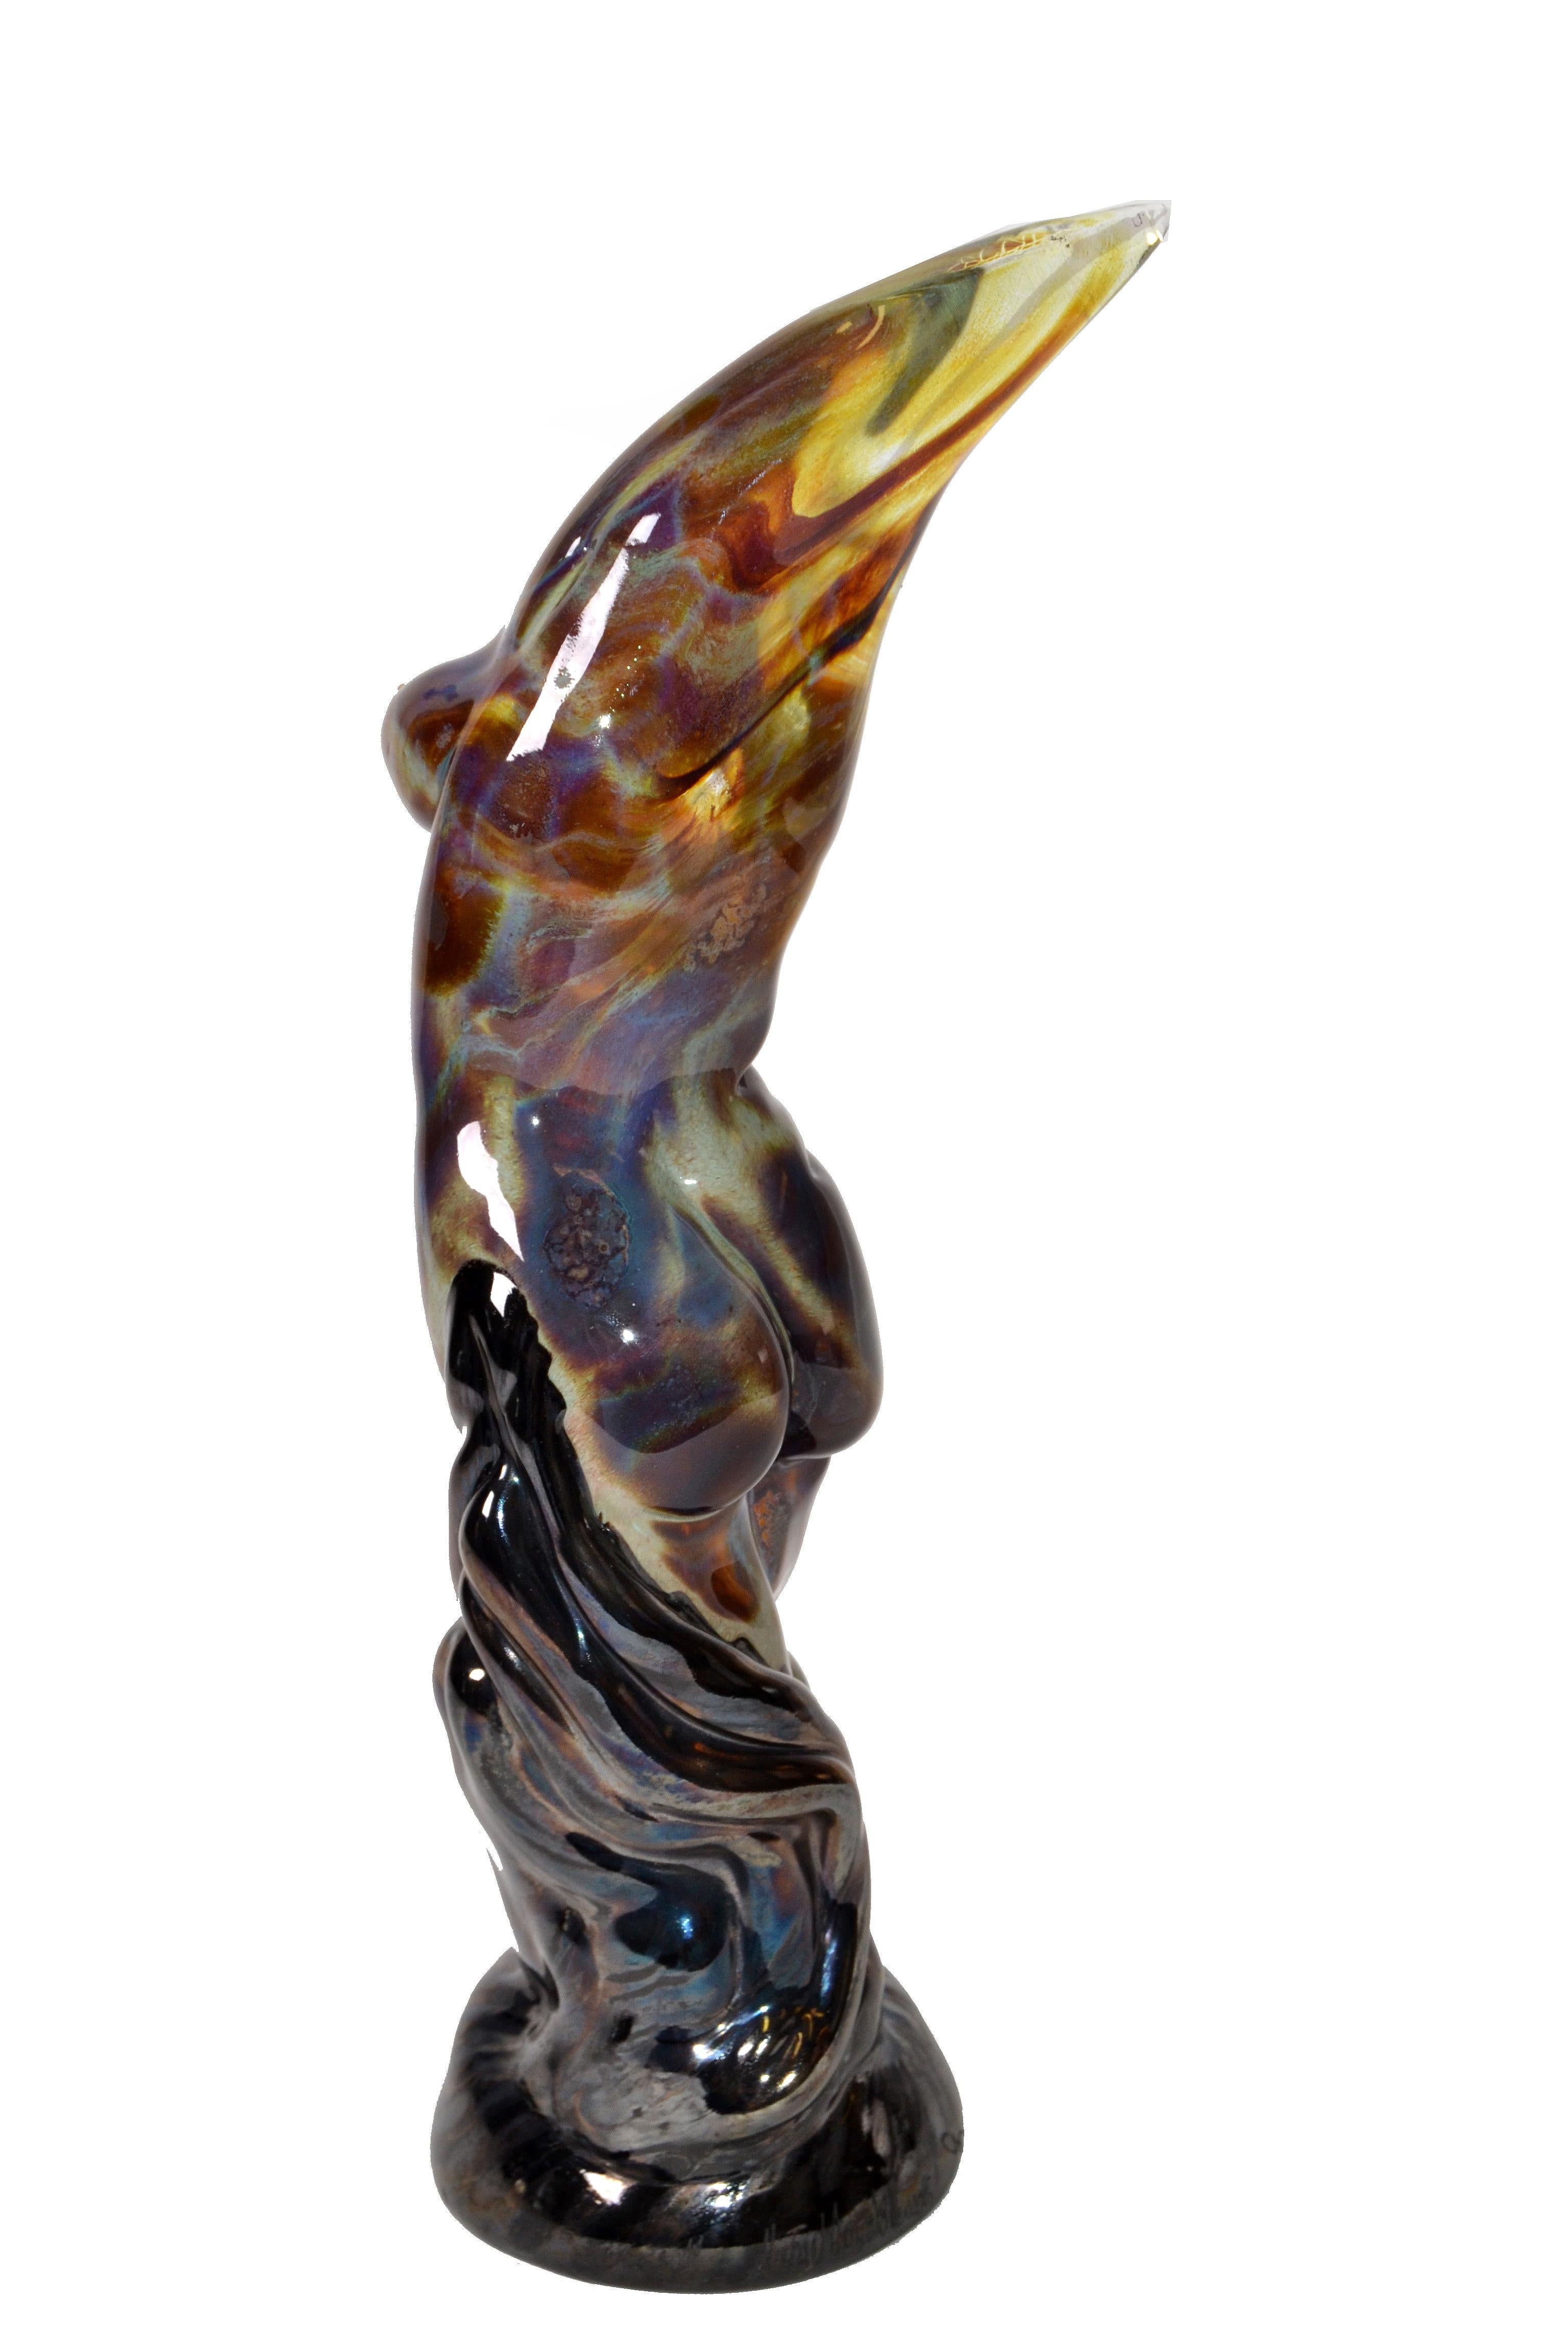 Modern Art Glass Sculpture Nude Woman Titled The Way She Moves Signed Michael In Good Condition For Sale In Miami, FL